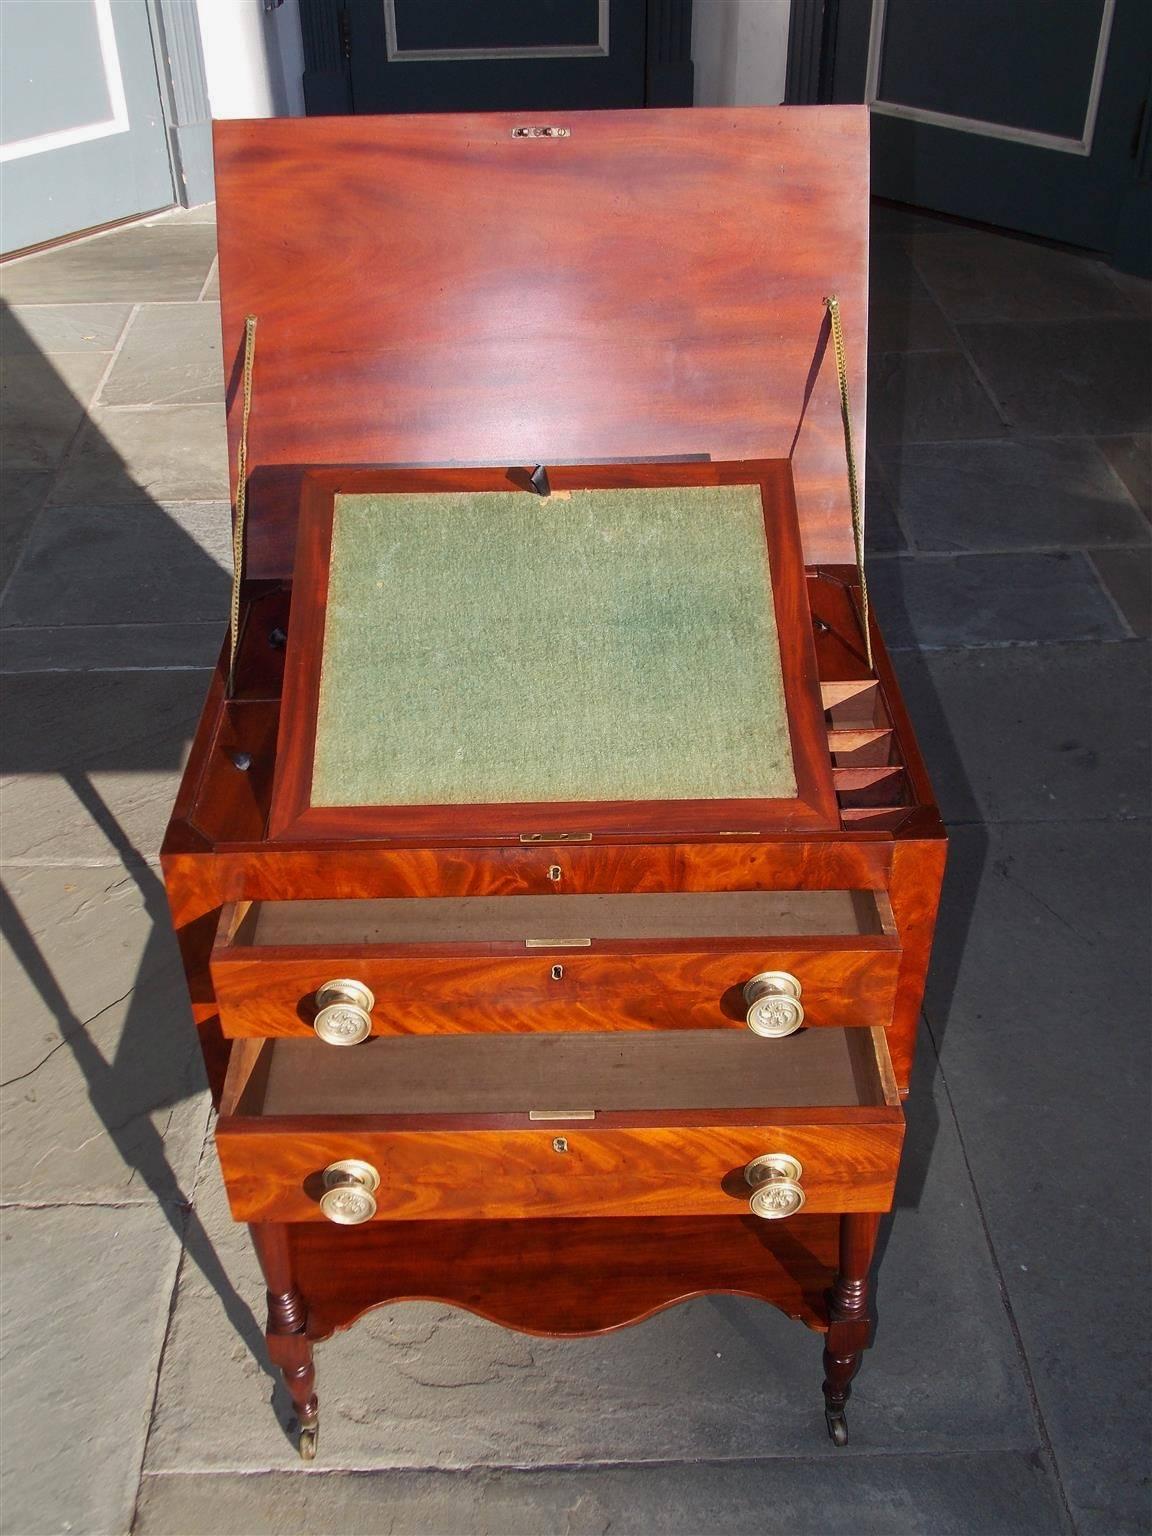 Early 19th Century American Sheraton Mahogany Work Table with Fitted Interior Desk, Circa 1815